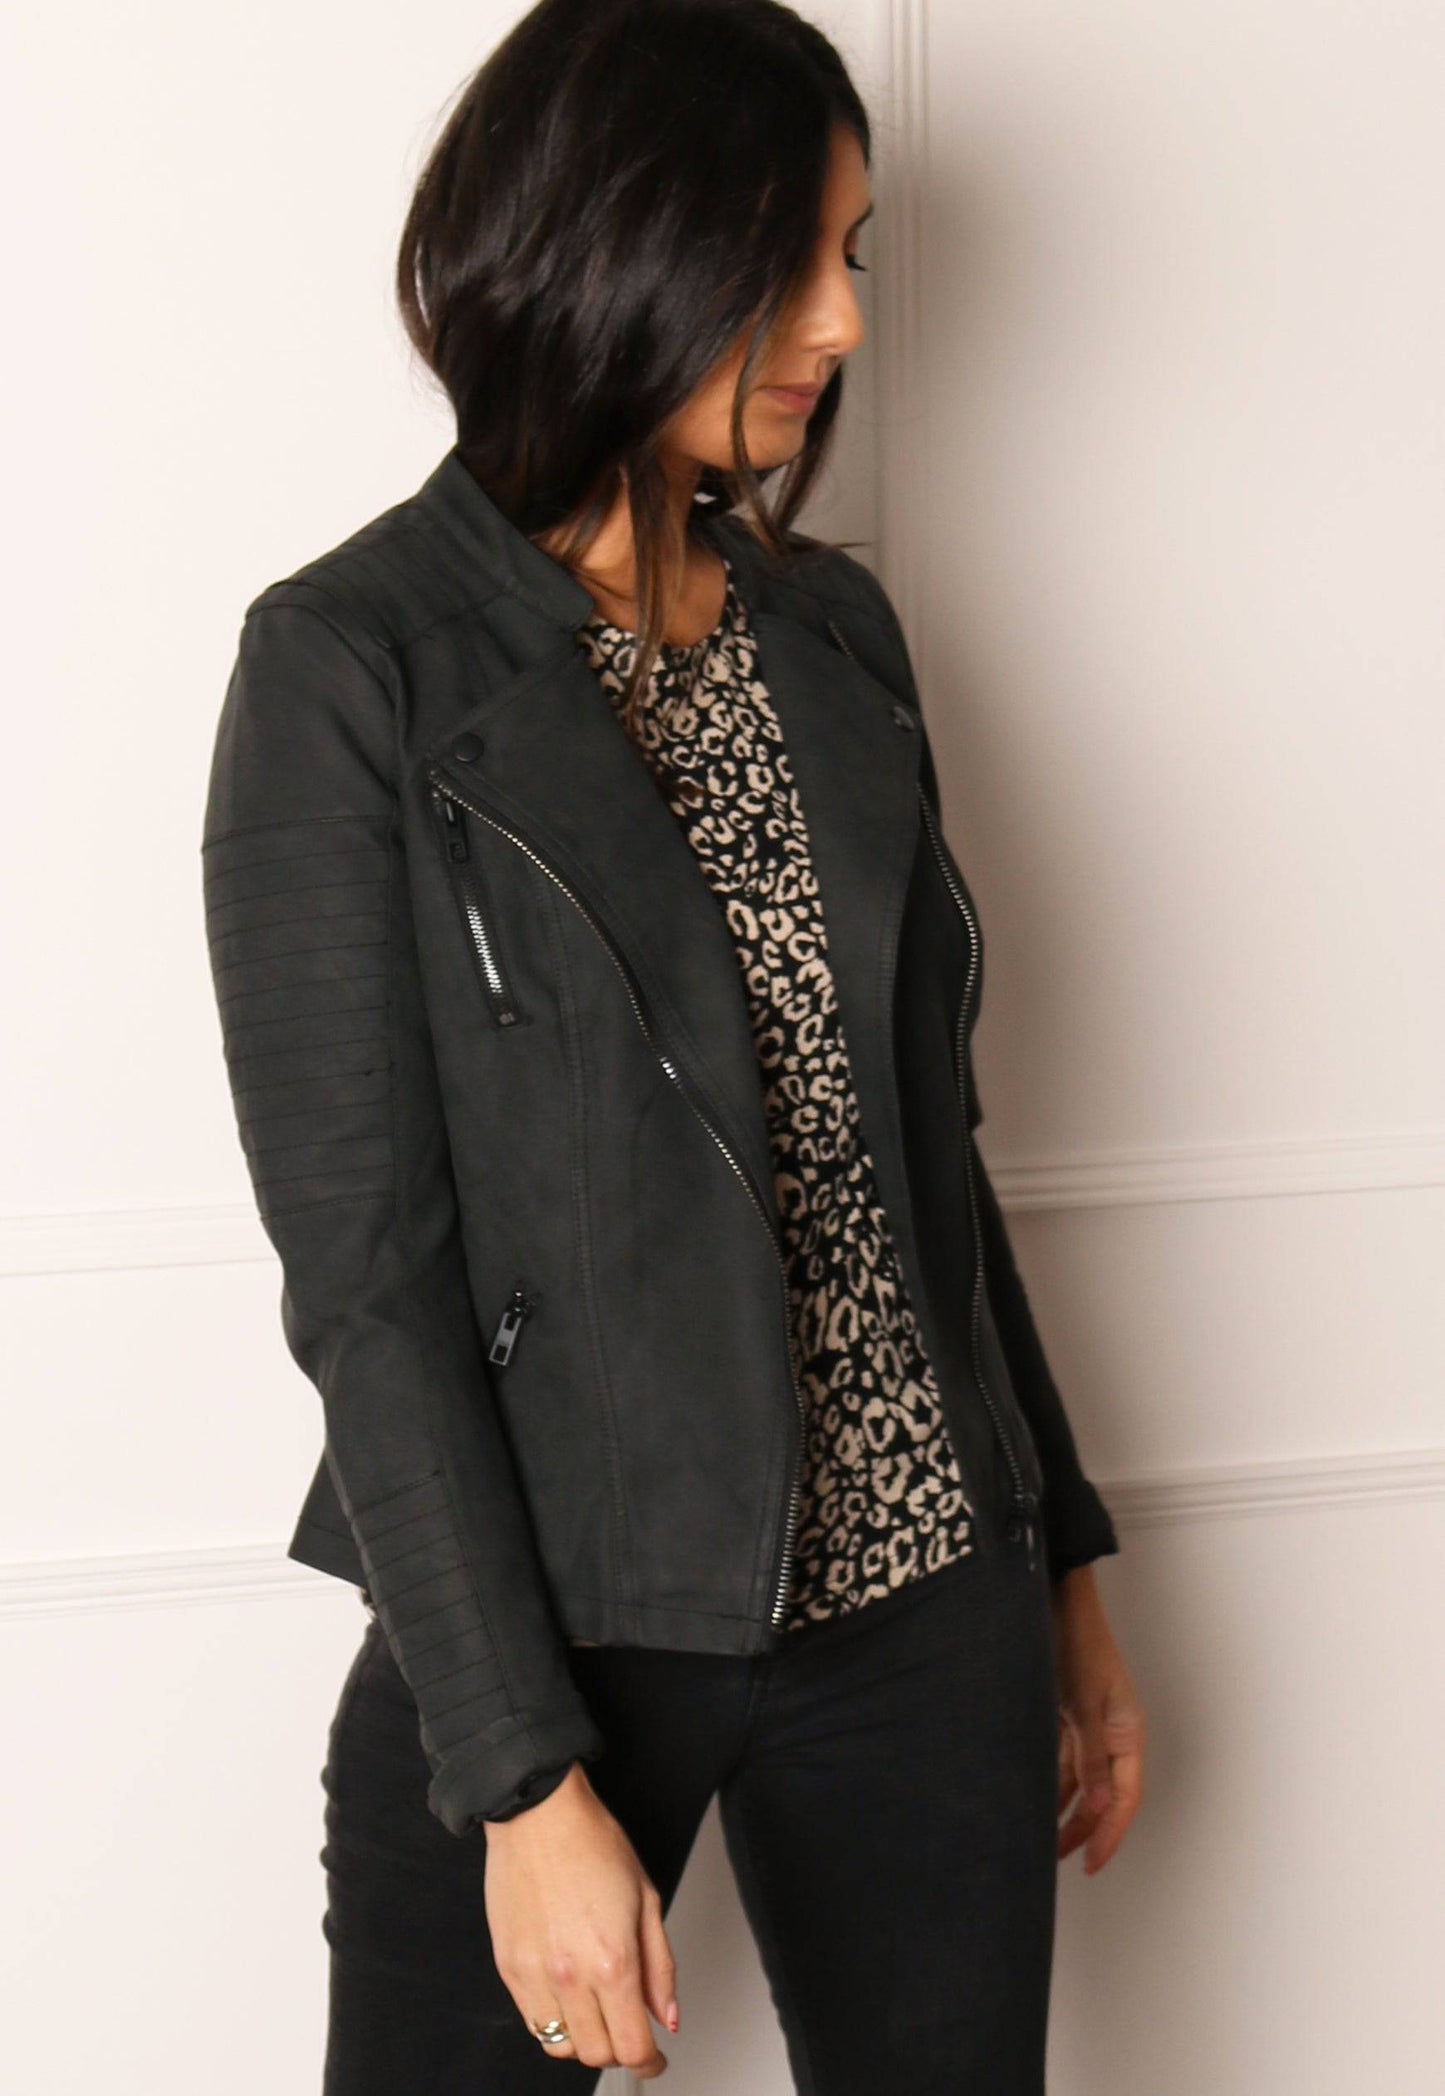 ONLY Lava Classic Faux Leather Biker Jacket in Distressed Black - concretebartops